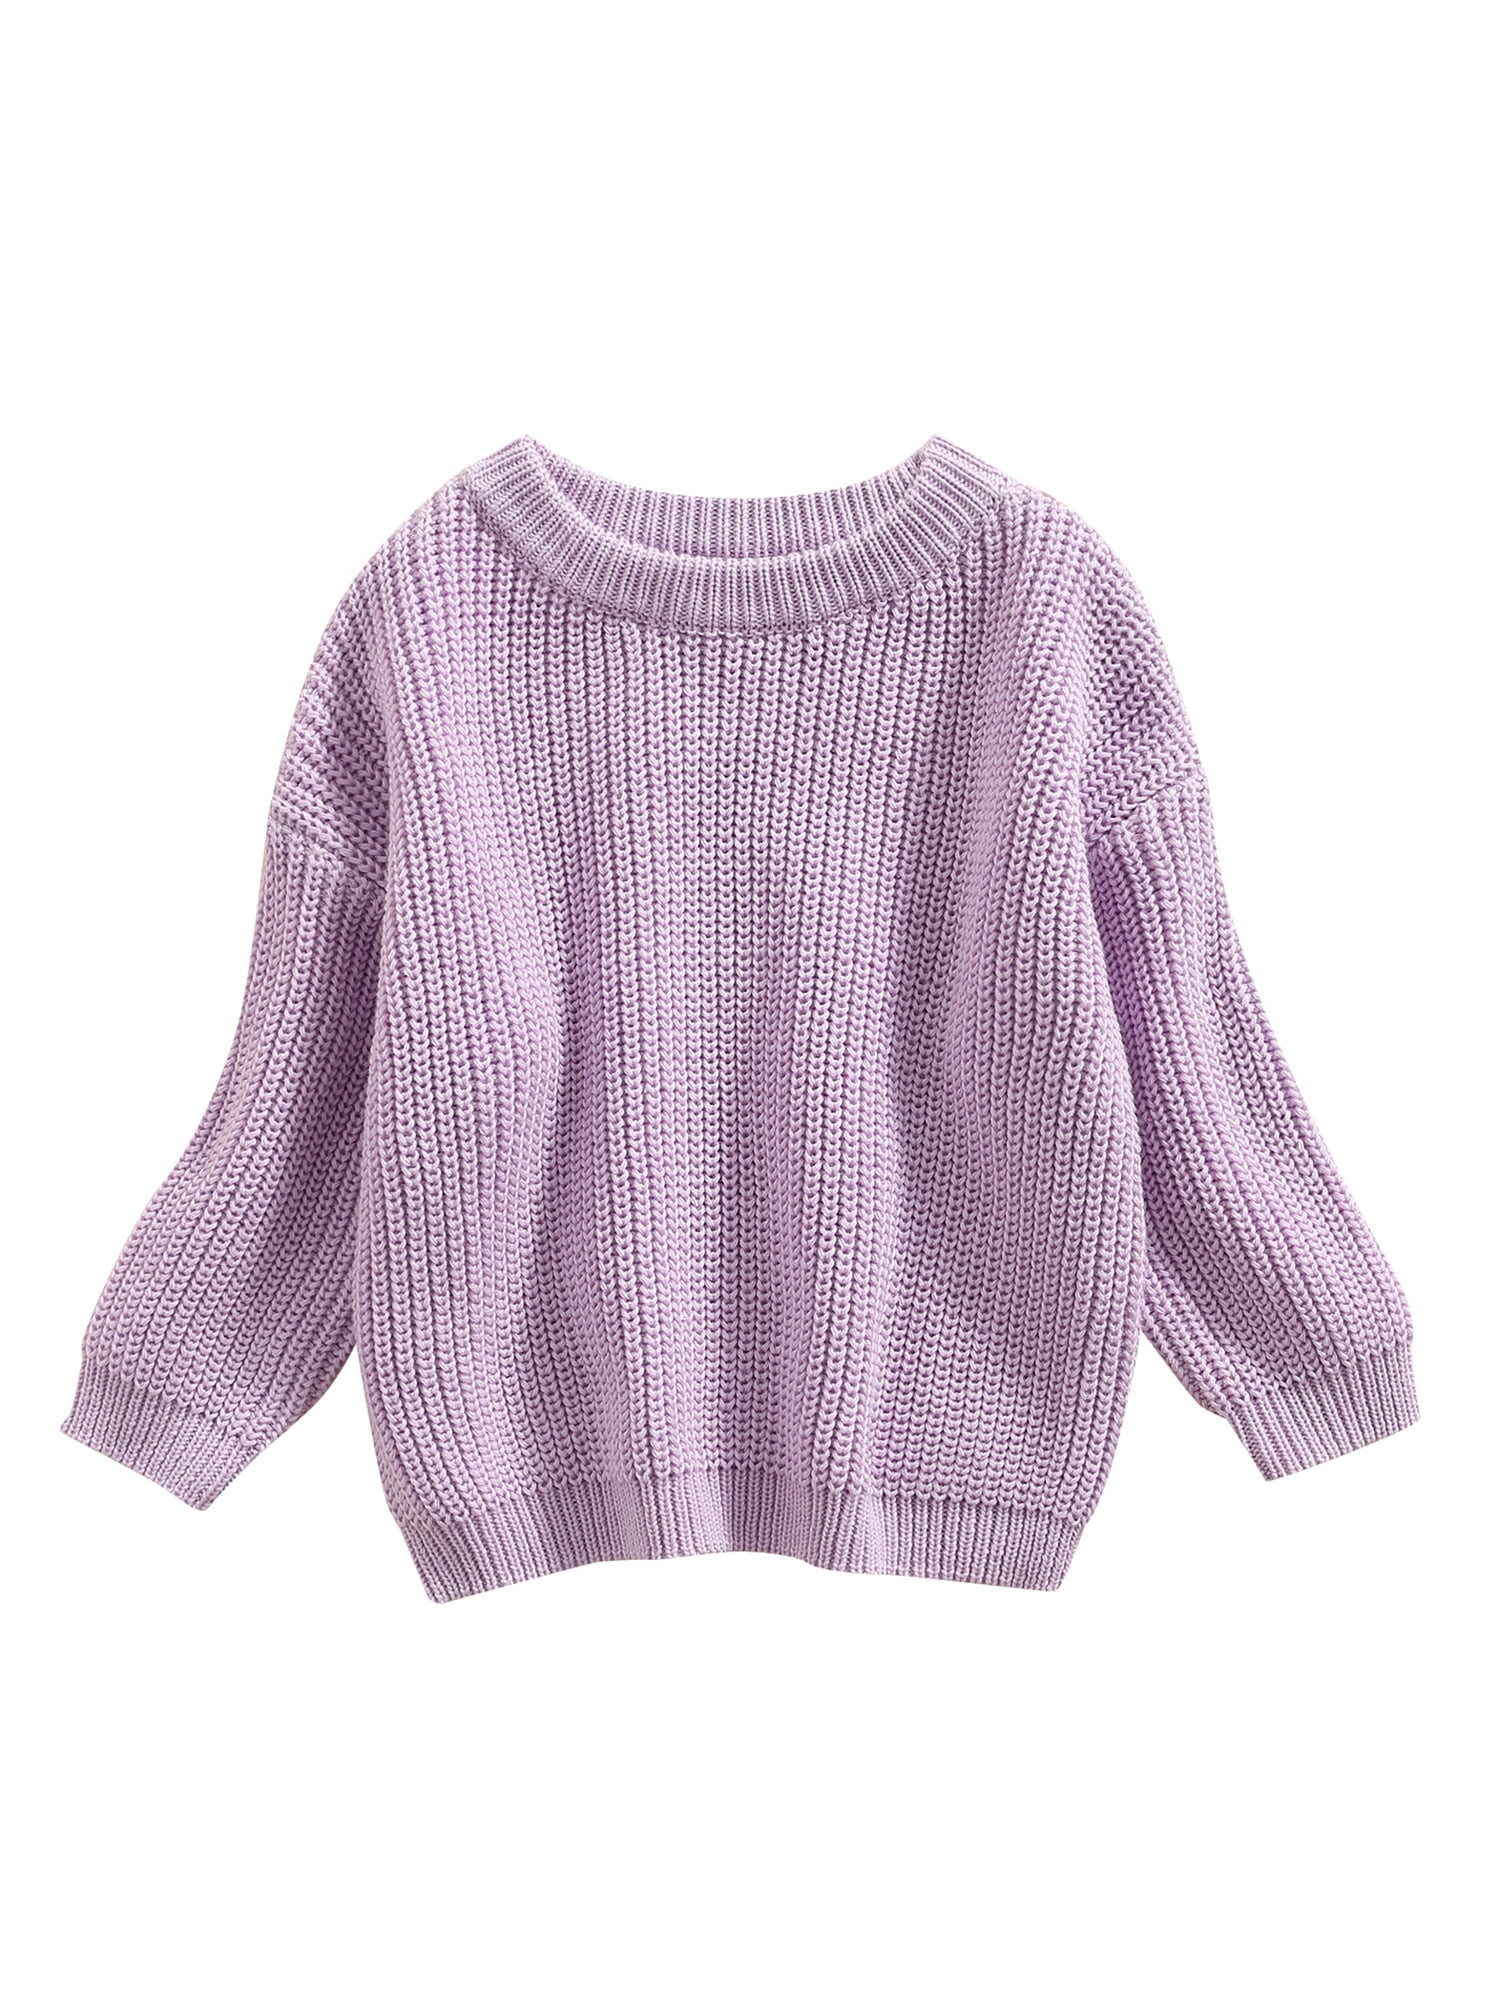 Baby Boy Girl Knit Sweater Pullover Crewneck Sweatshirt Warm Long Sleeve Blouse Tops for Infant Toddler 